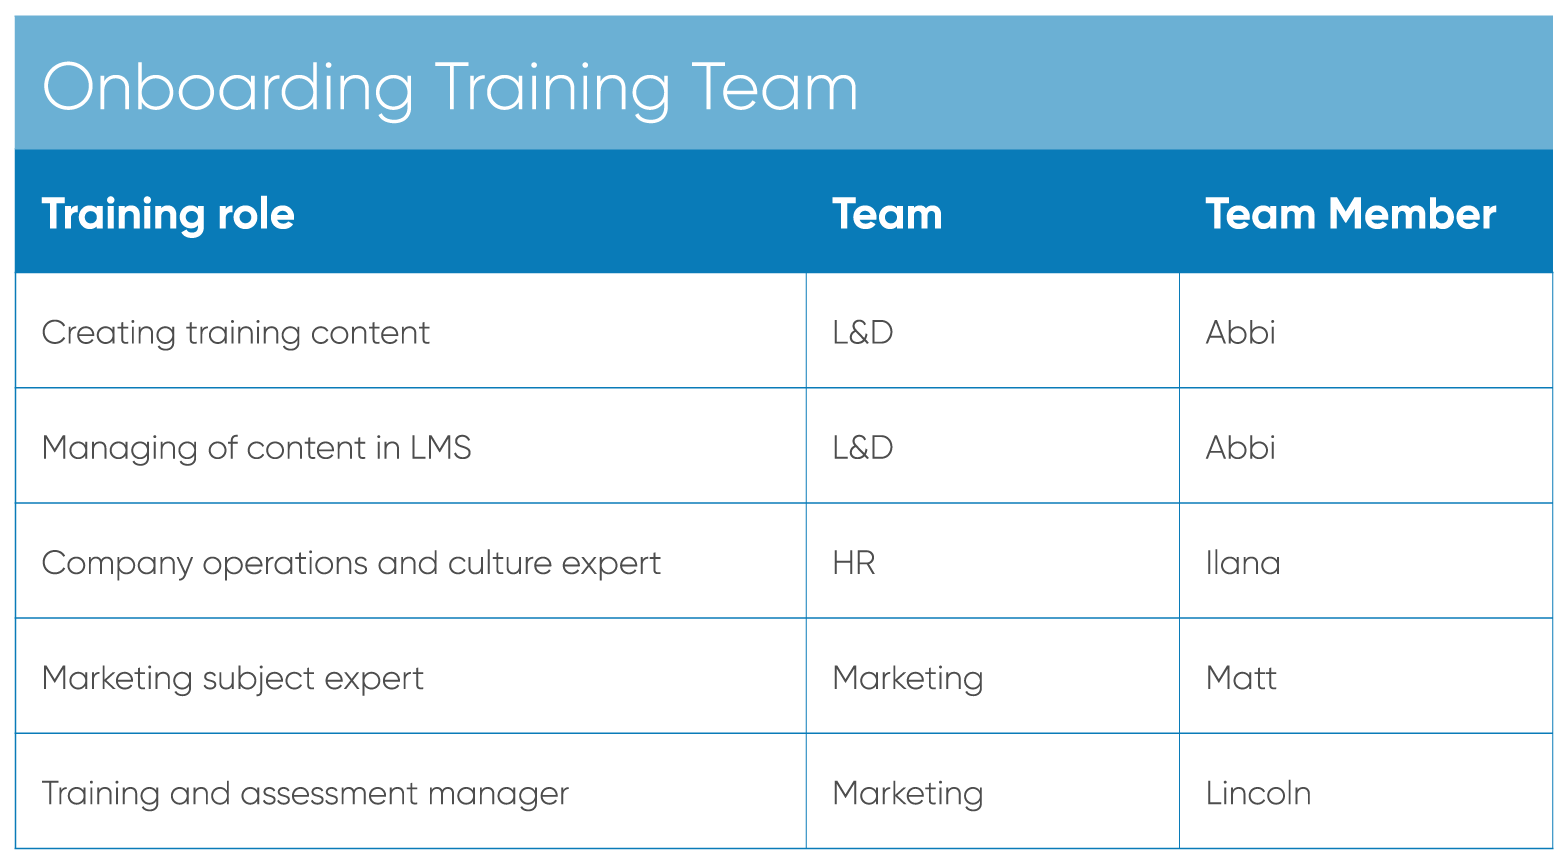 Onboarding plan - create your onboarding training team